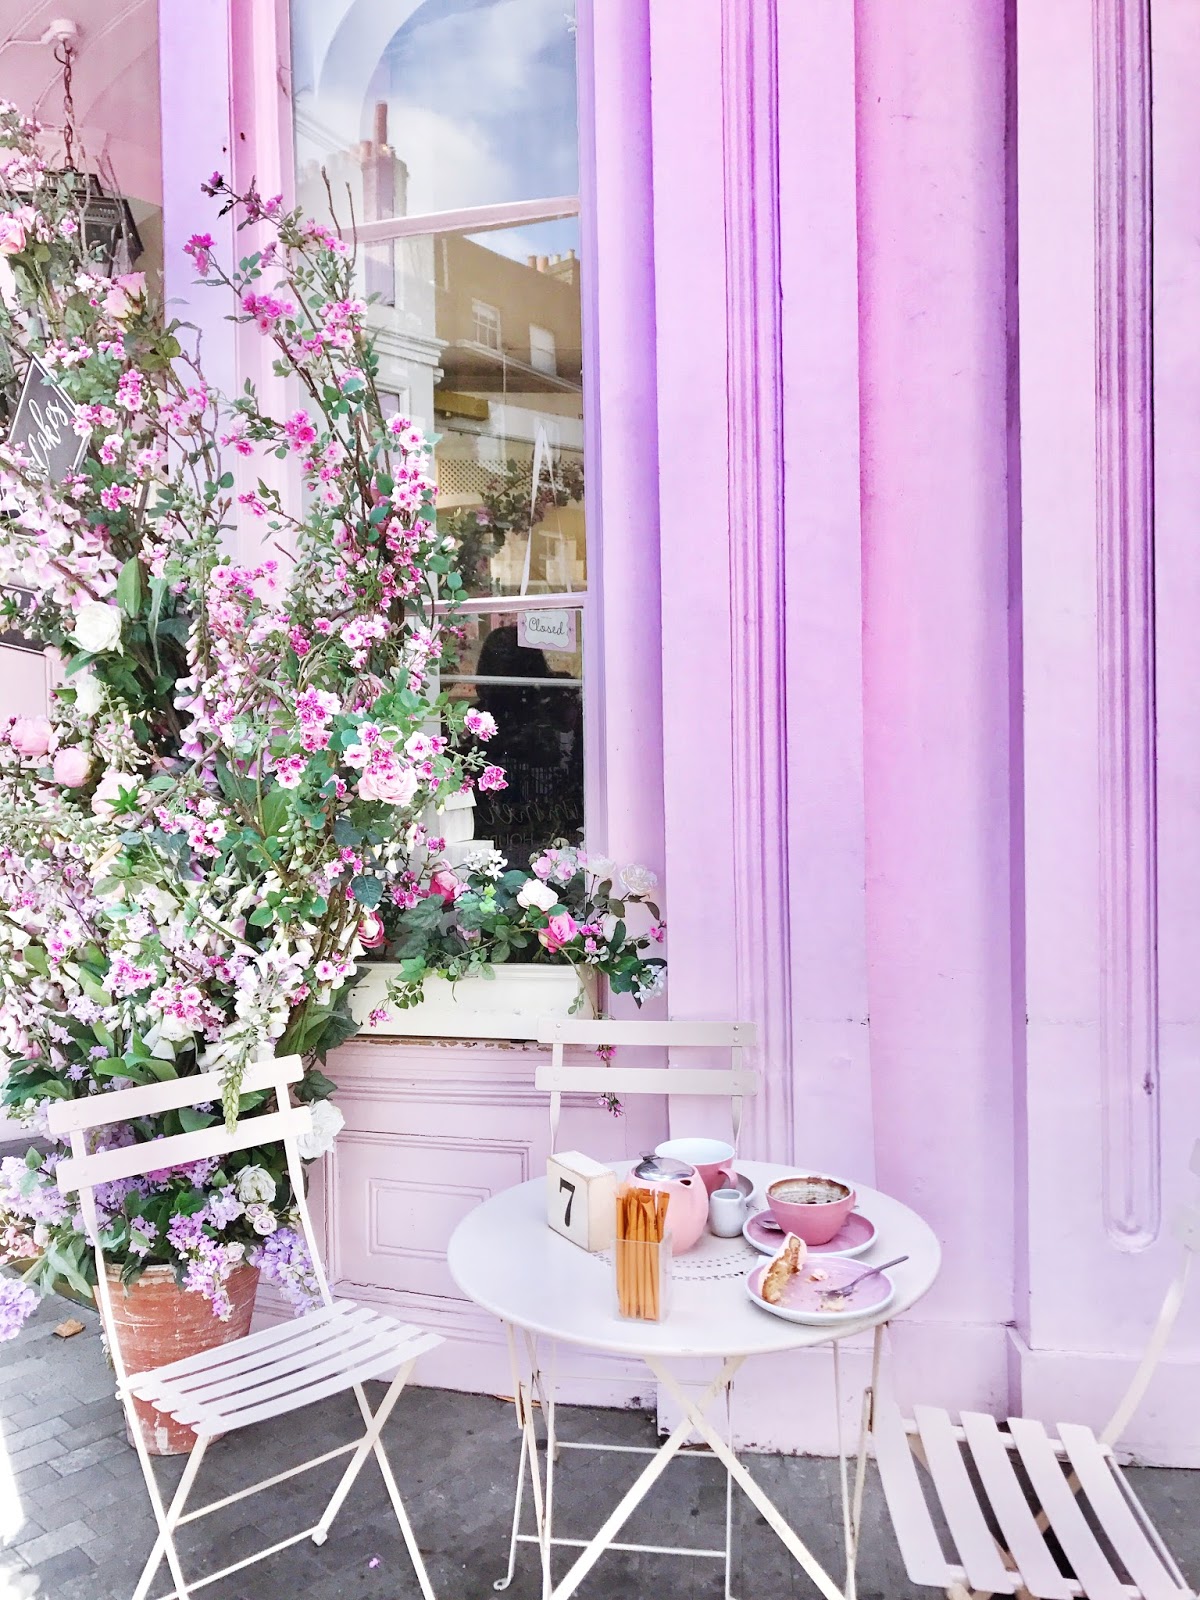 Bijuleni - 7 Instagram Perfect Brunch and Coffee Spots in London - Peggy Porschen Cakes